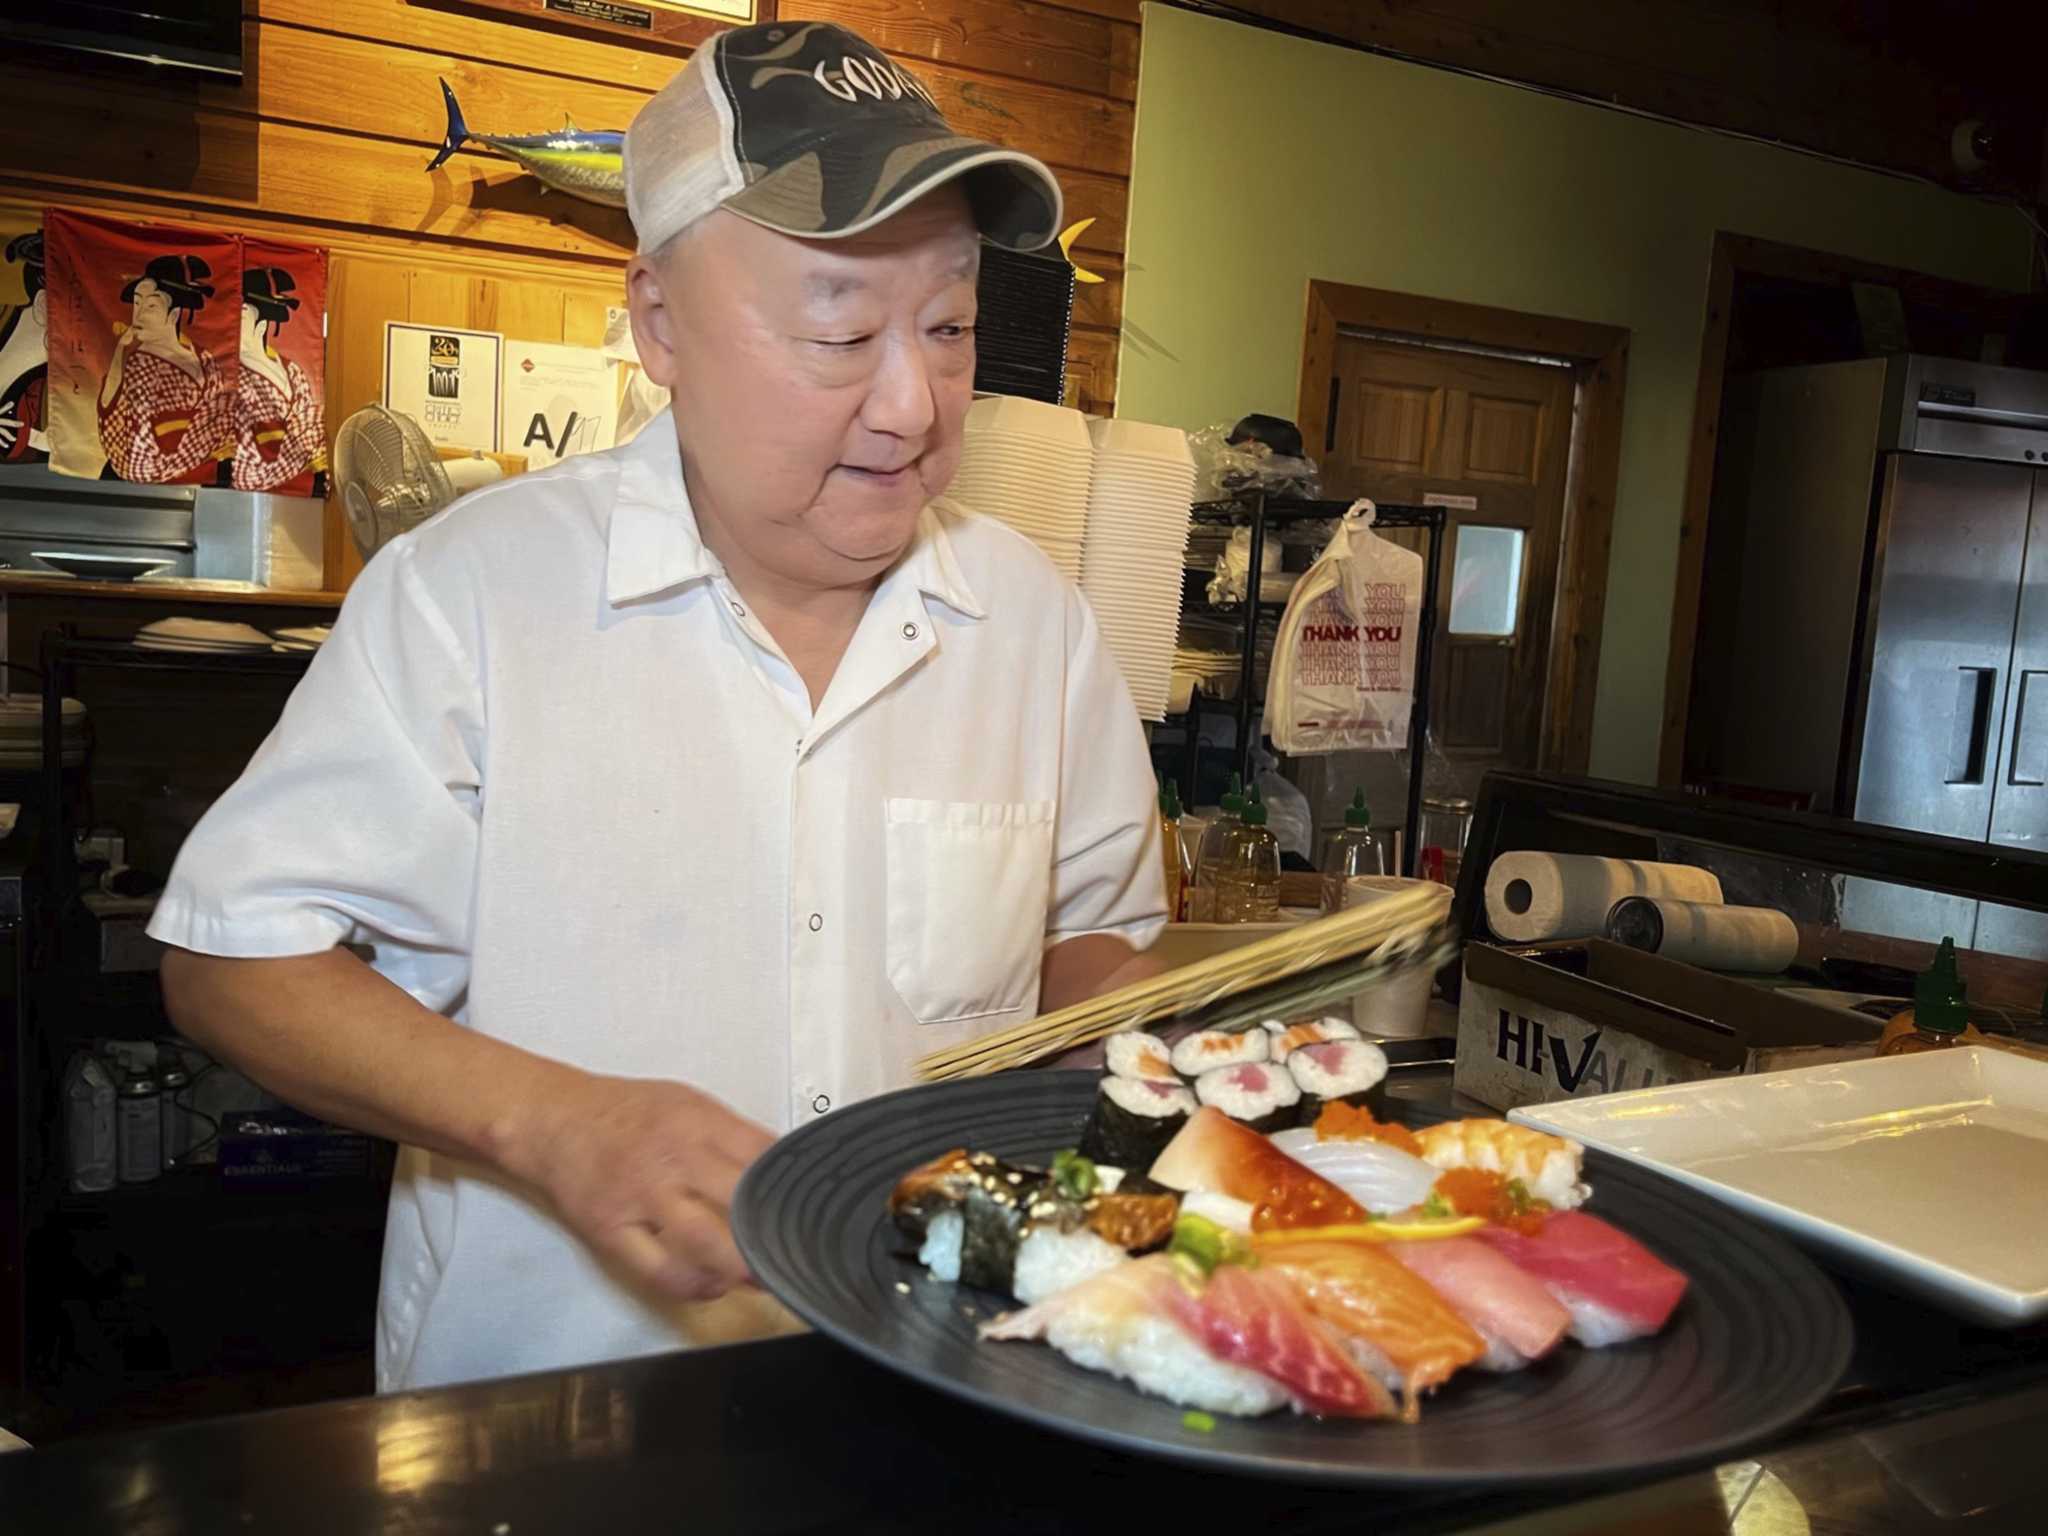 Godai Sushi files for bankruptcy liquidation after tax woes